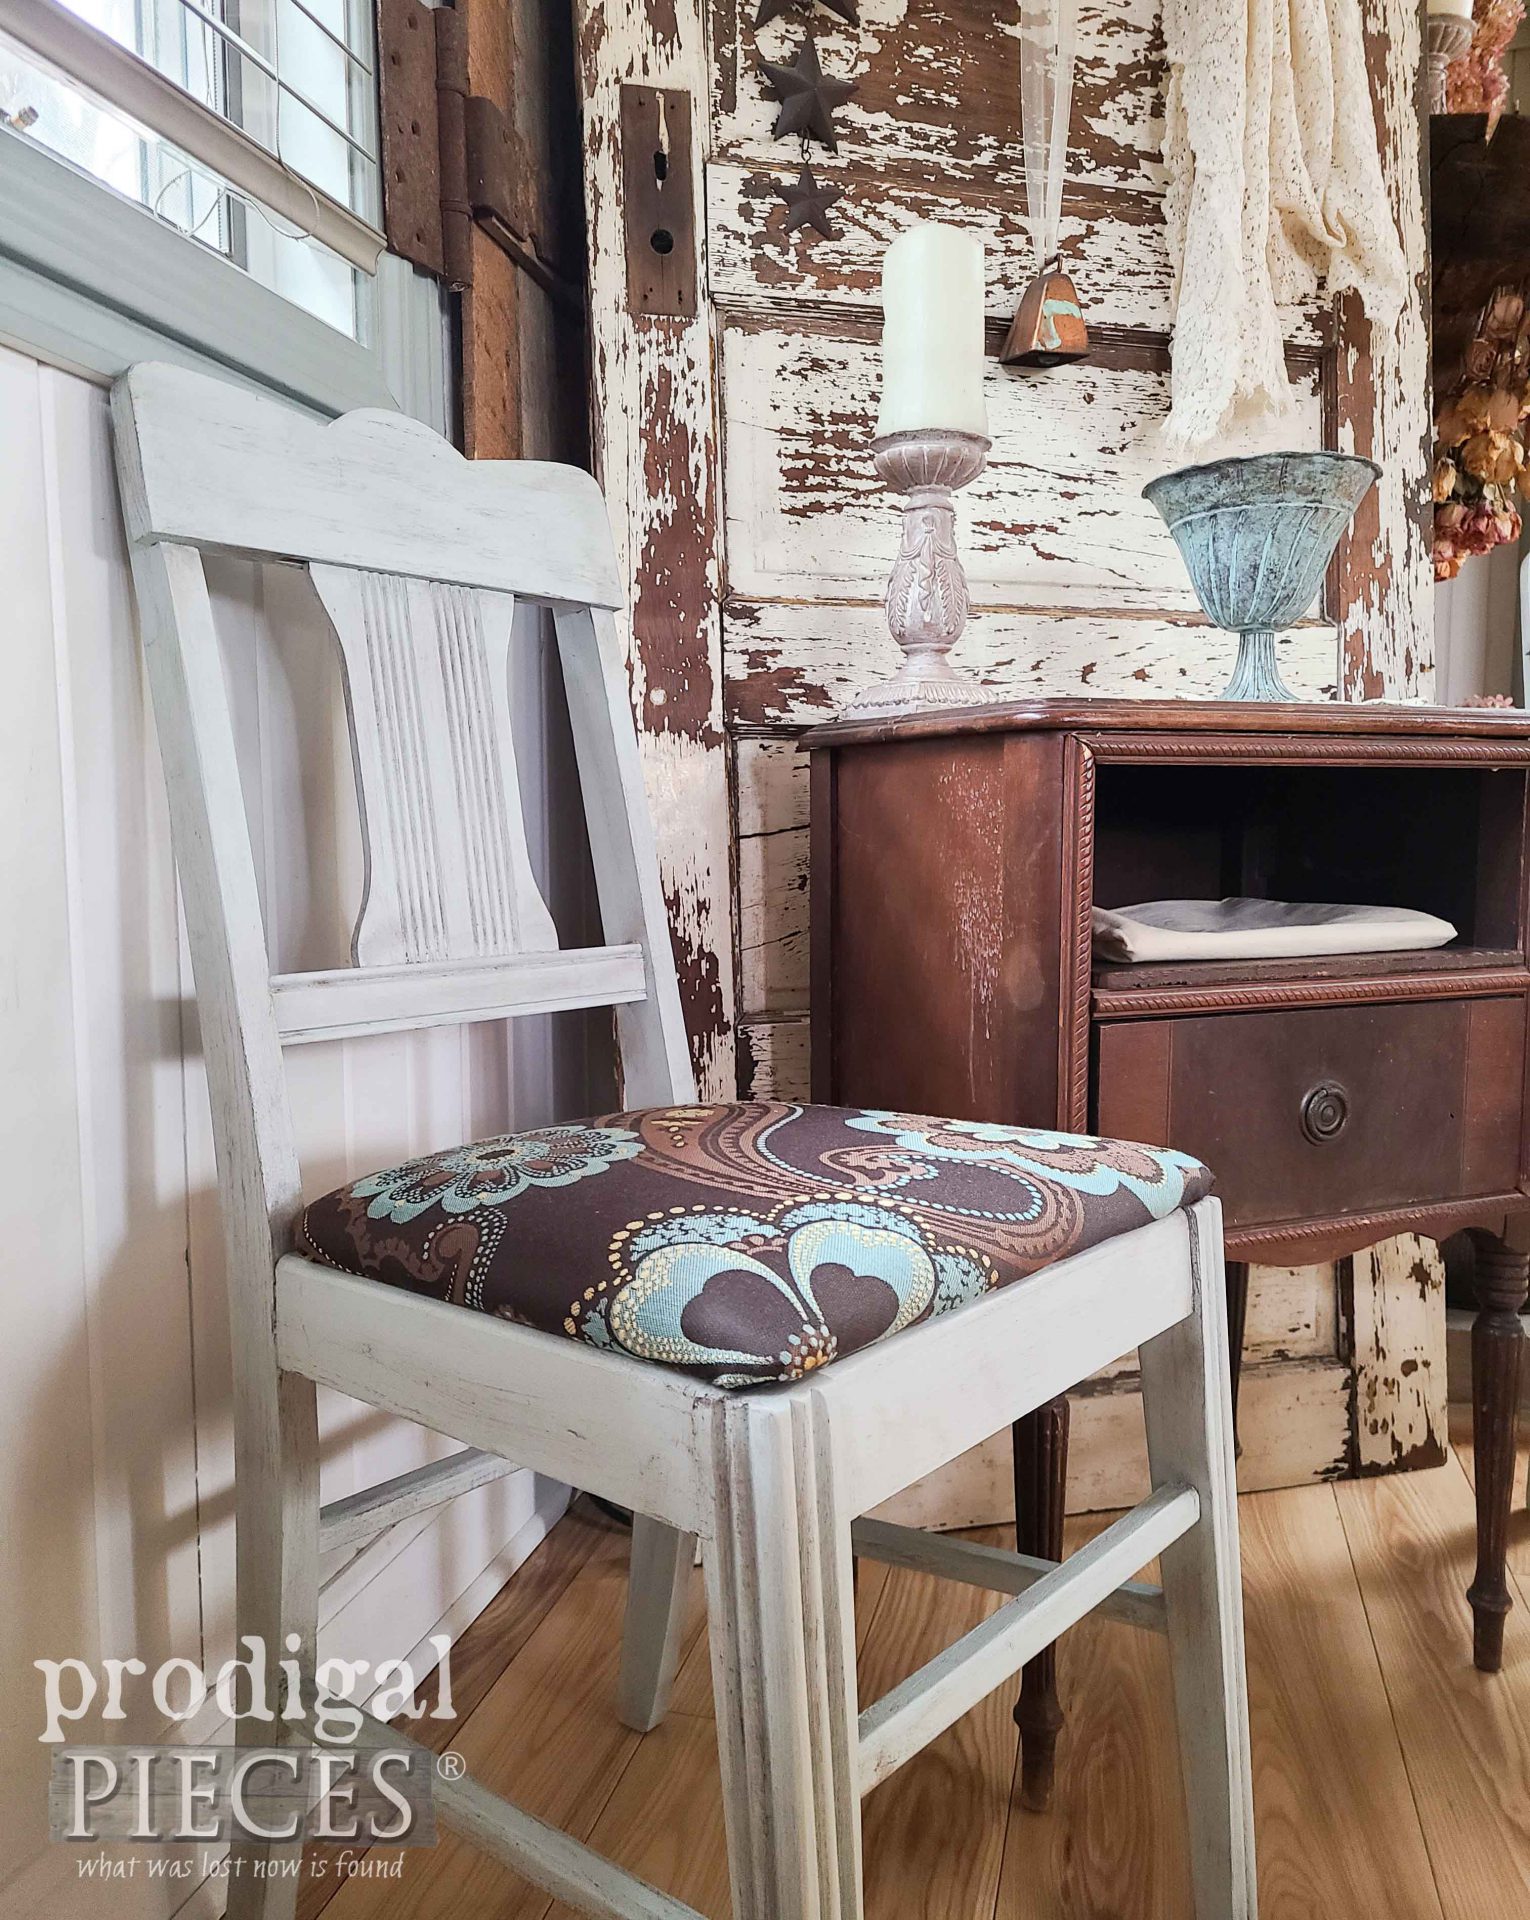 Solid Oak Vintage Dining Chairs by Larissa of Prodigal Pieces | prodigalpieces.com #prodigalpieces #furniture #home #diy